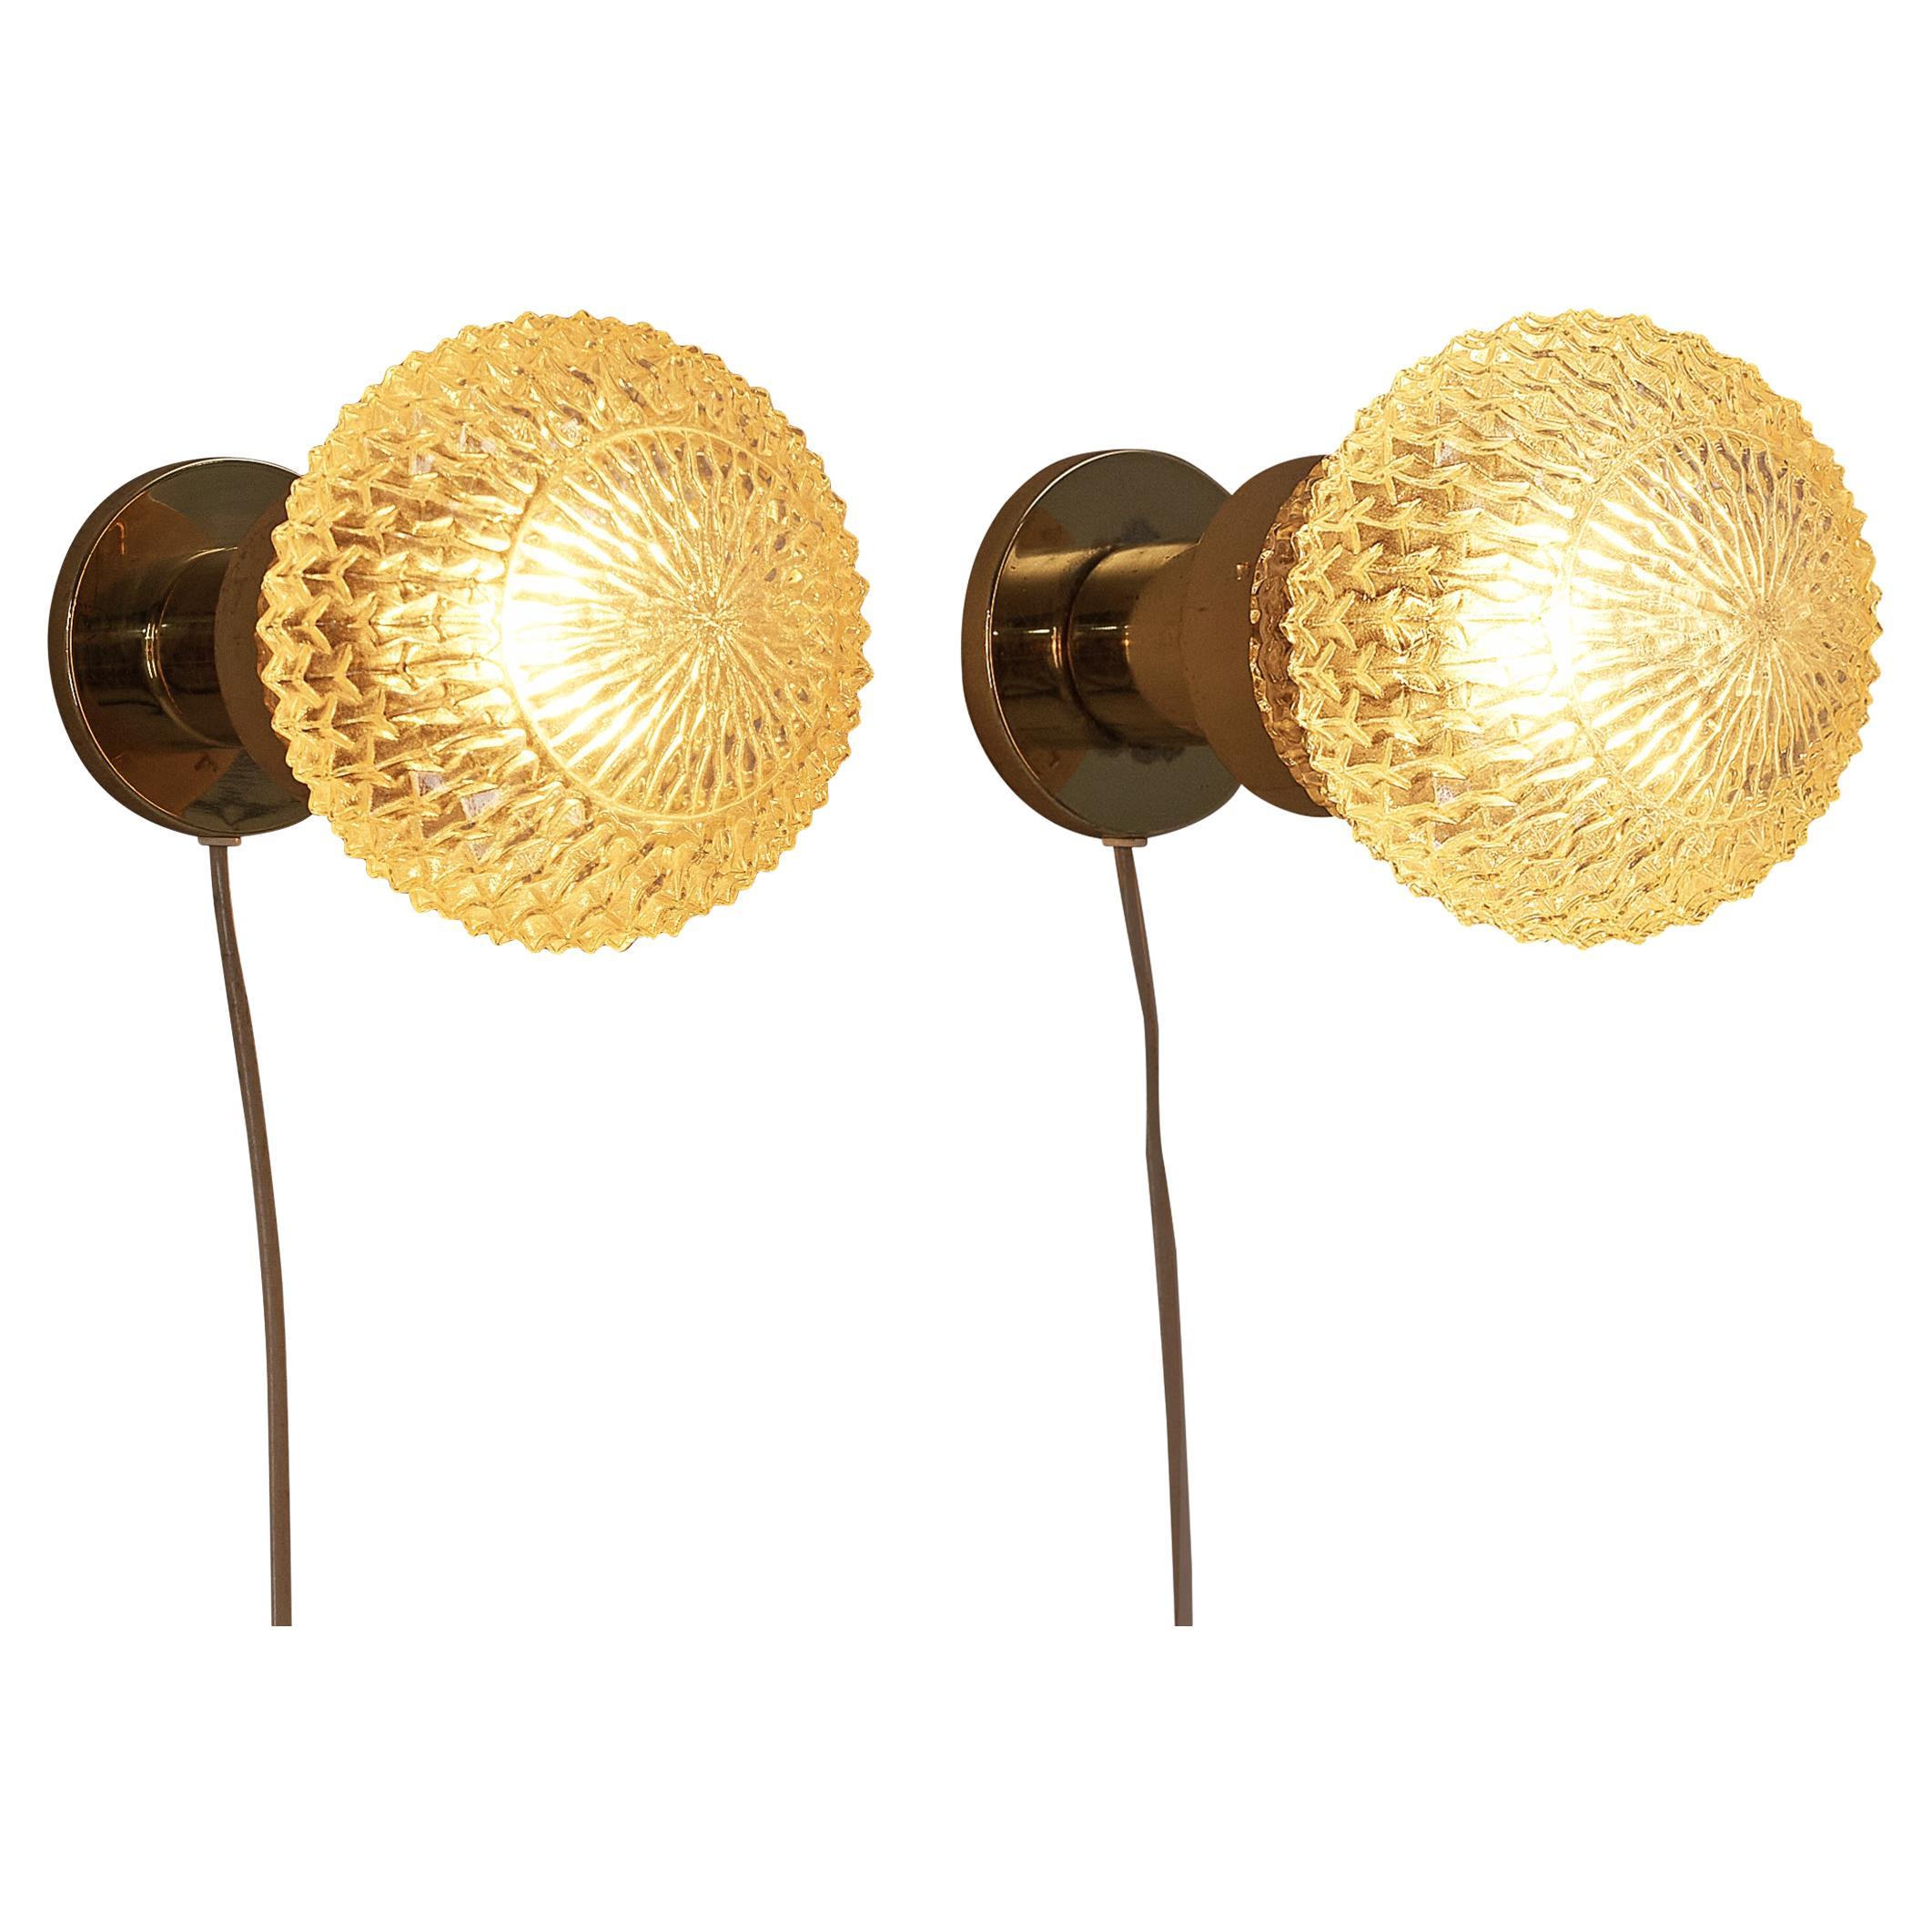 Charming Wall Lights in Structured Glass and Brass